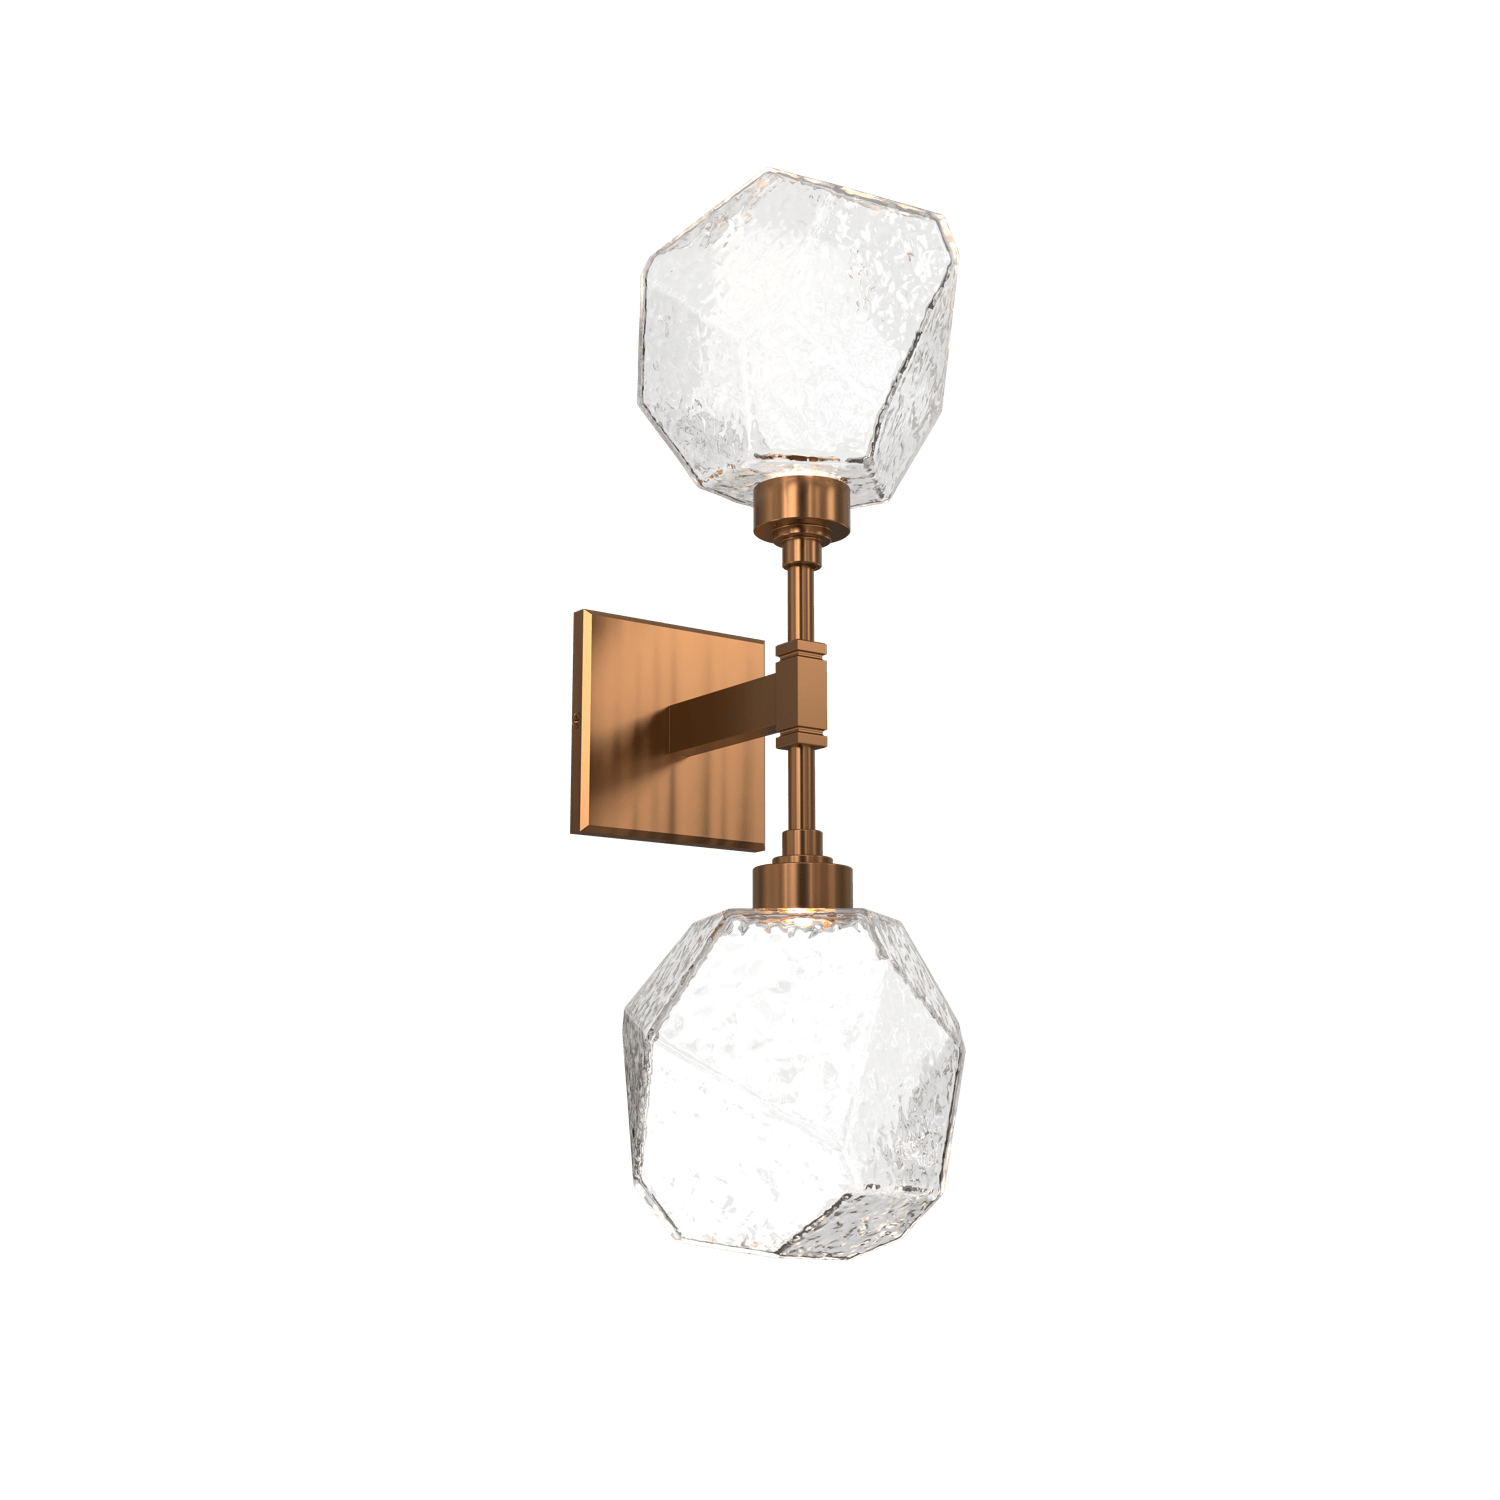 IDB0039-02-RB-C-Hammerton-Studio-Gem-double-wall-sconce-with-oil-rubbed-bronze-finish-and-clear-blown-glass-shades-and-LED-lamping